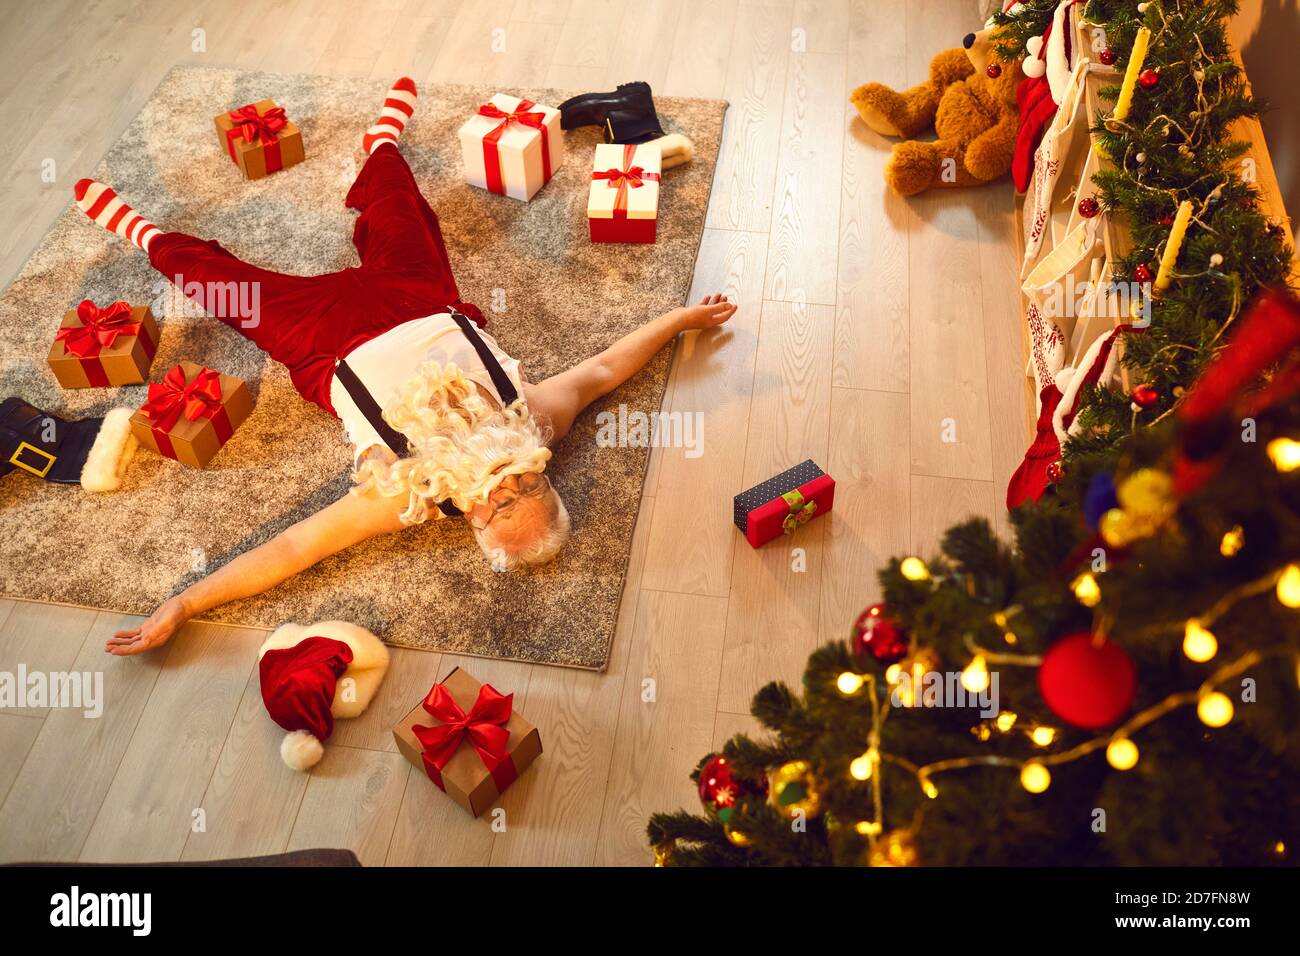 Drunk or simply tired Santa Claus sleeping on floor of a living-room with presents scattered around Stock Photo